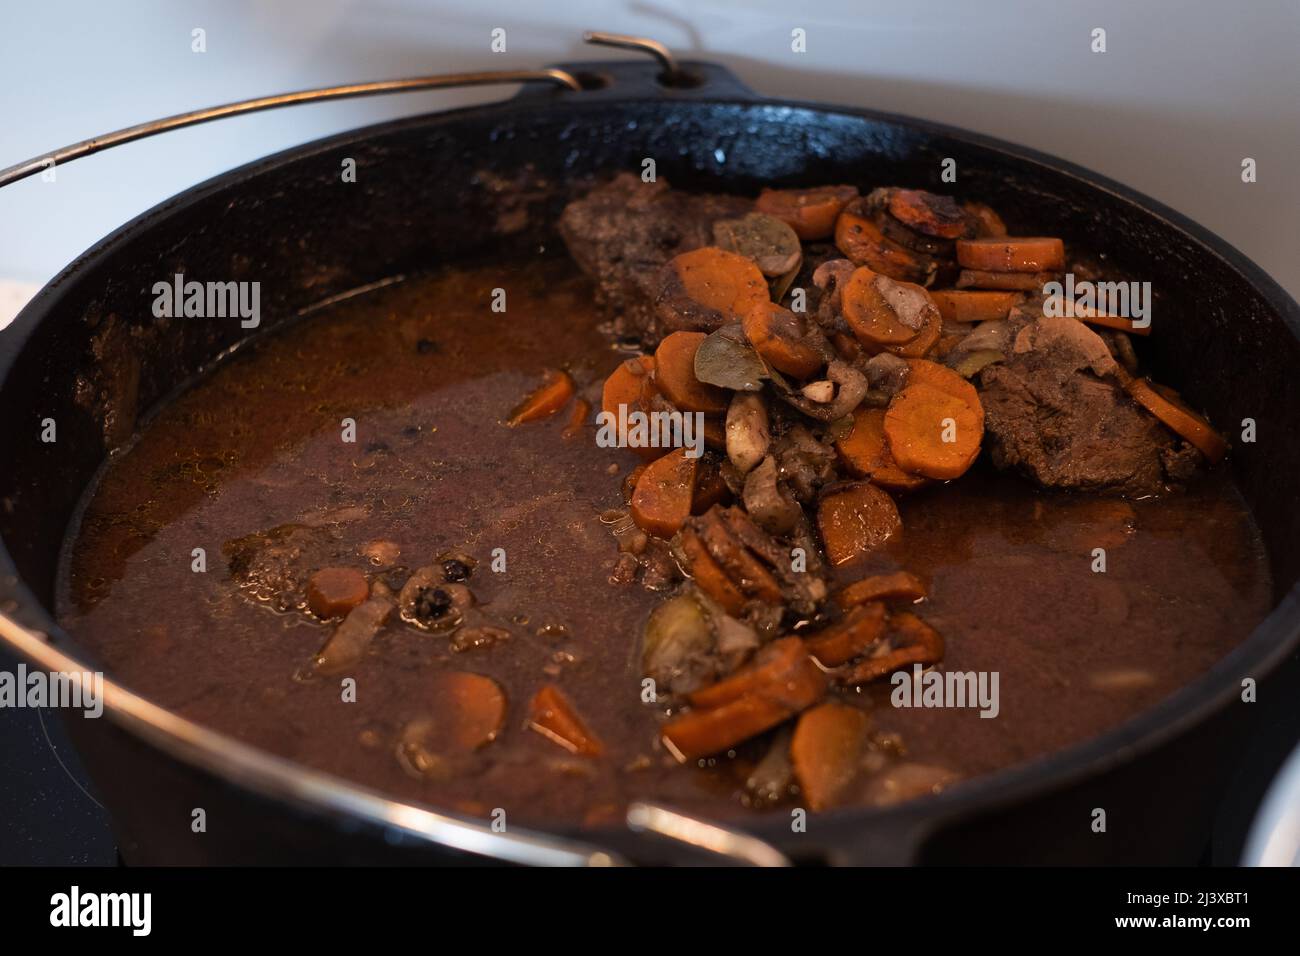 Braised beef cheeks cooking in red wine sauce in cast iron Dutch oven. Slow cooked meat stew. Stock Photo